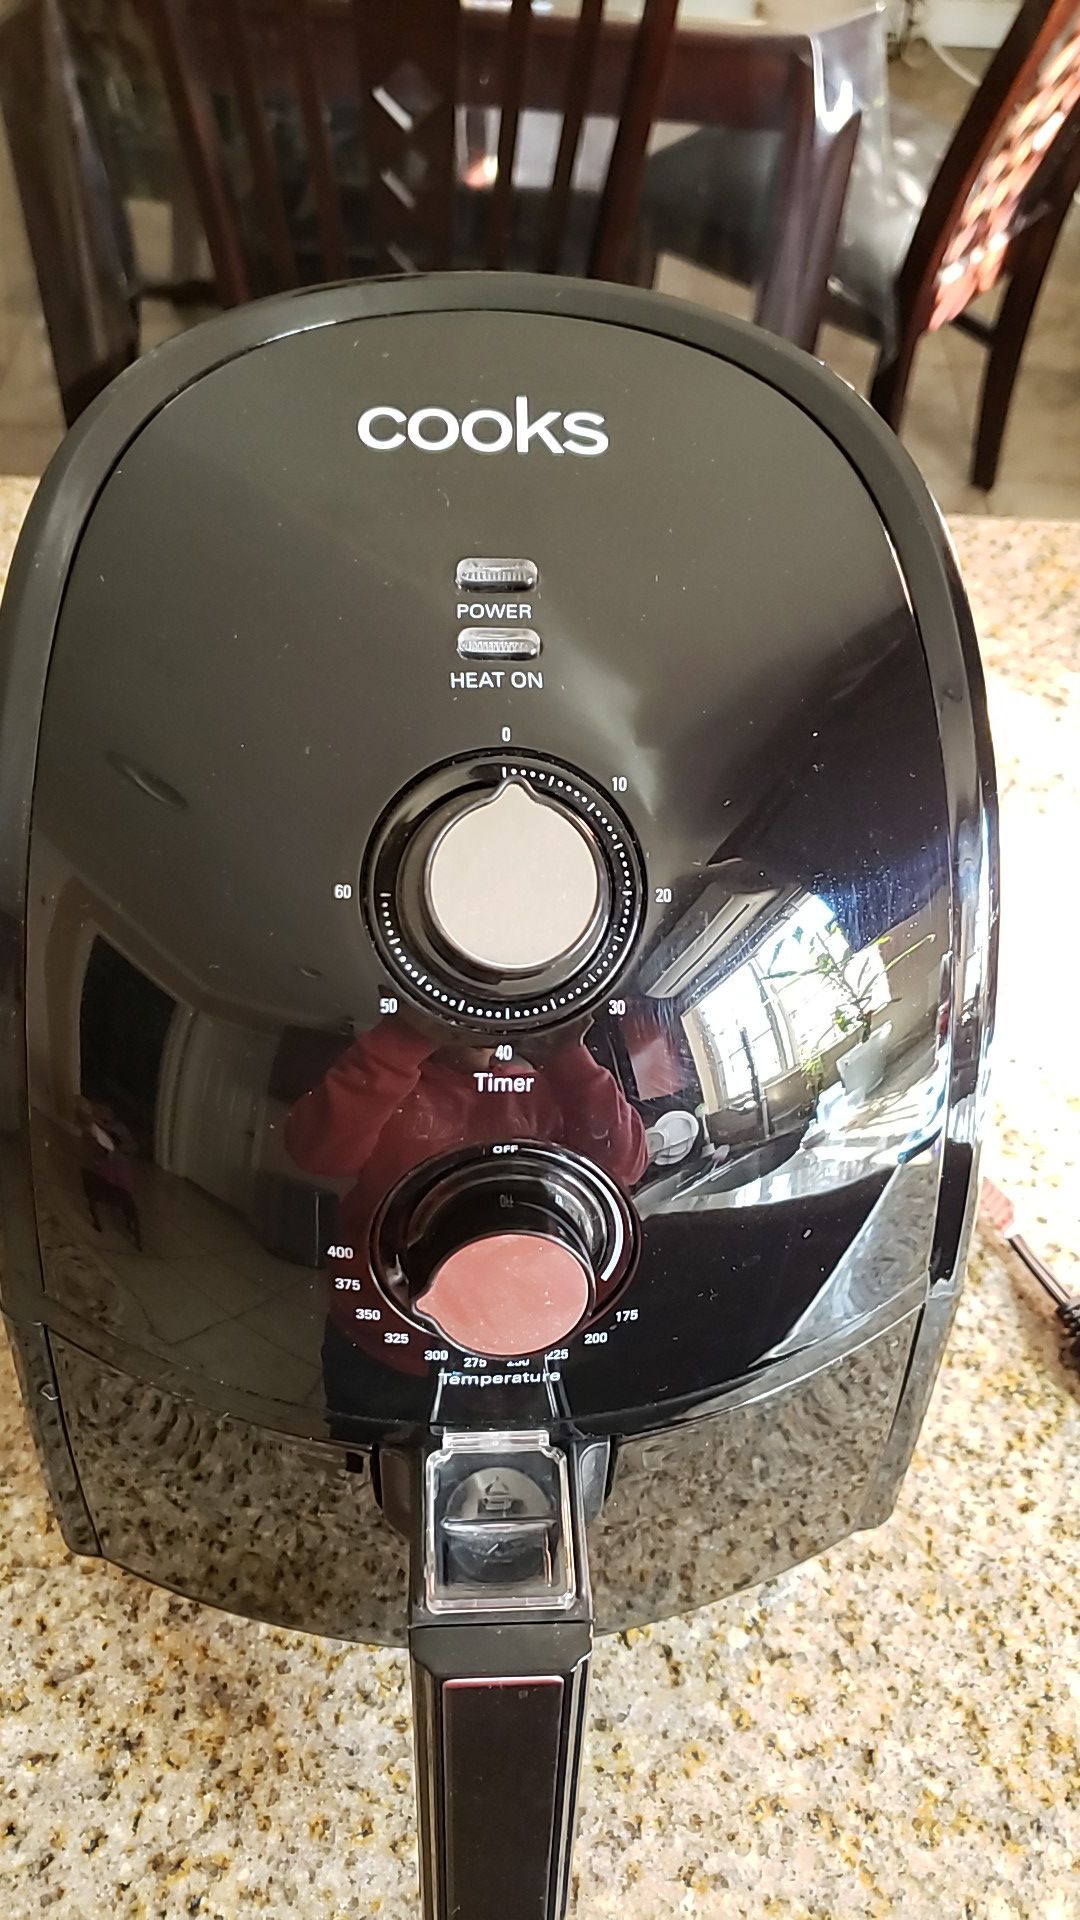 Cooks air fryer TXG-DS14 freir a aire Cooks 2.5L Air Fryer for Sale in Los  Angeles, CA - OfferUp